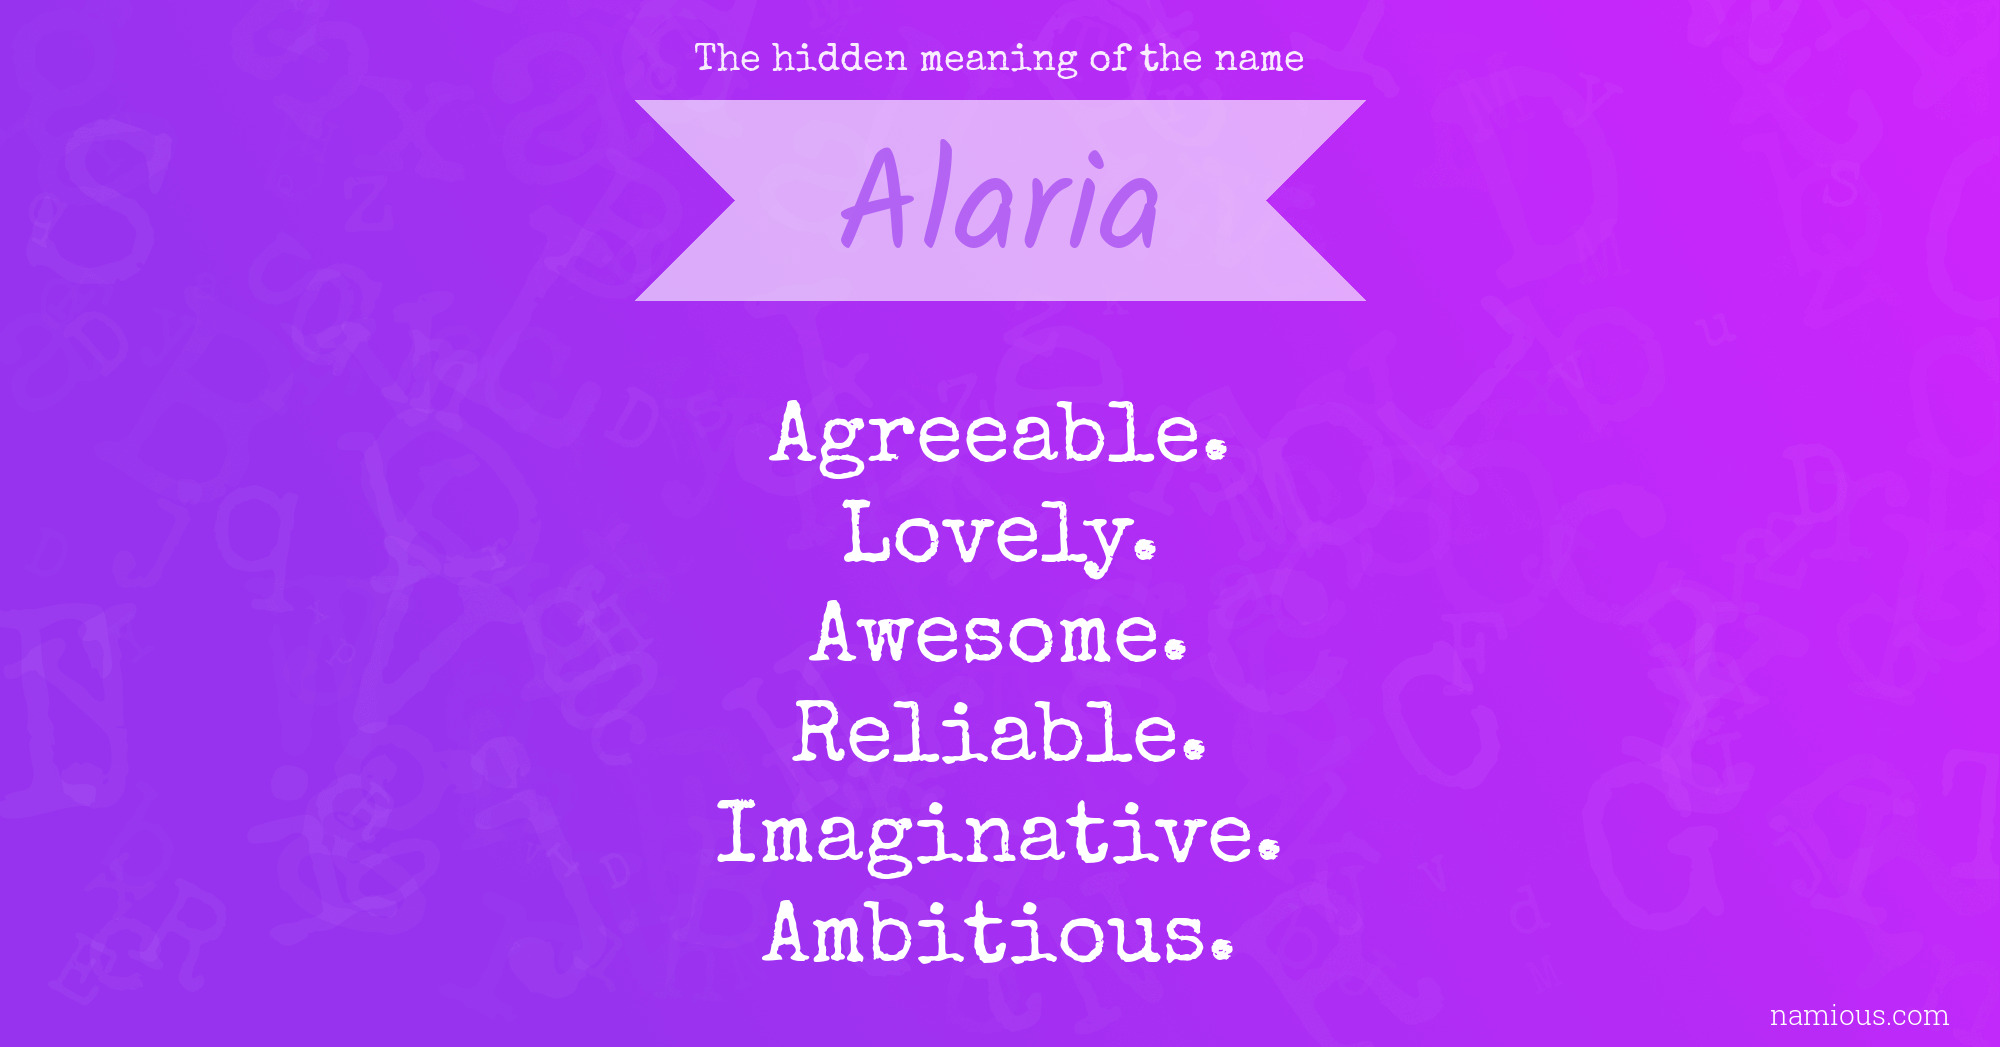 The hidden meaning of the name Alaria